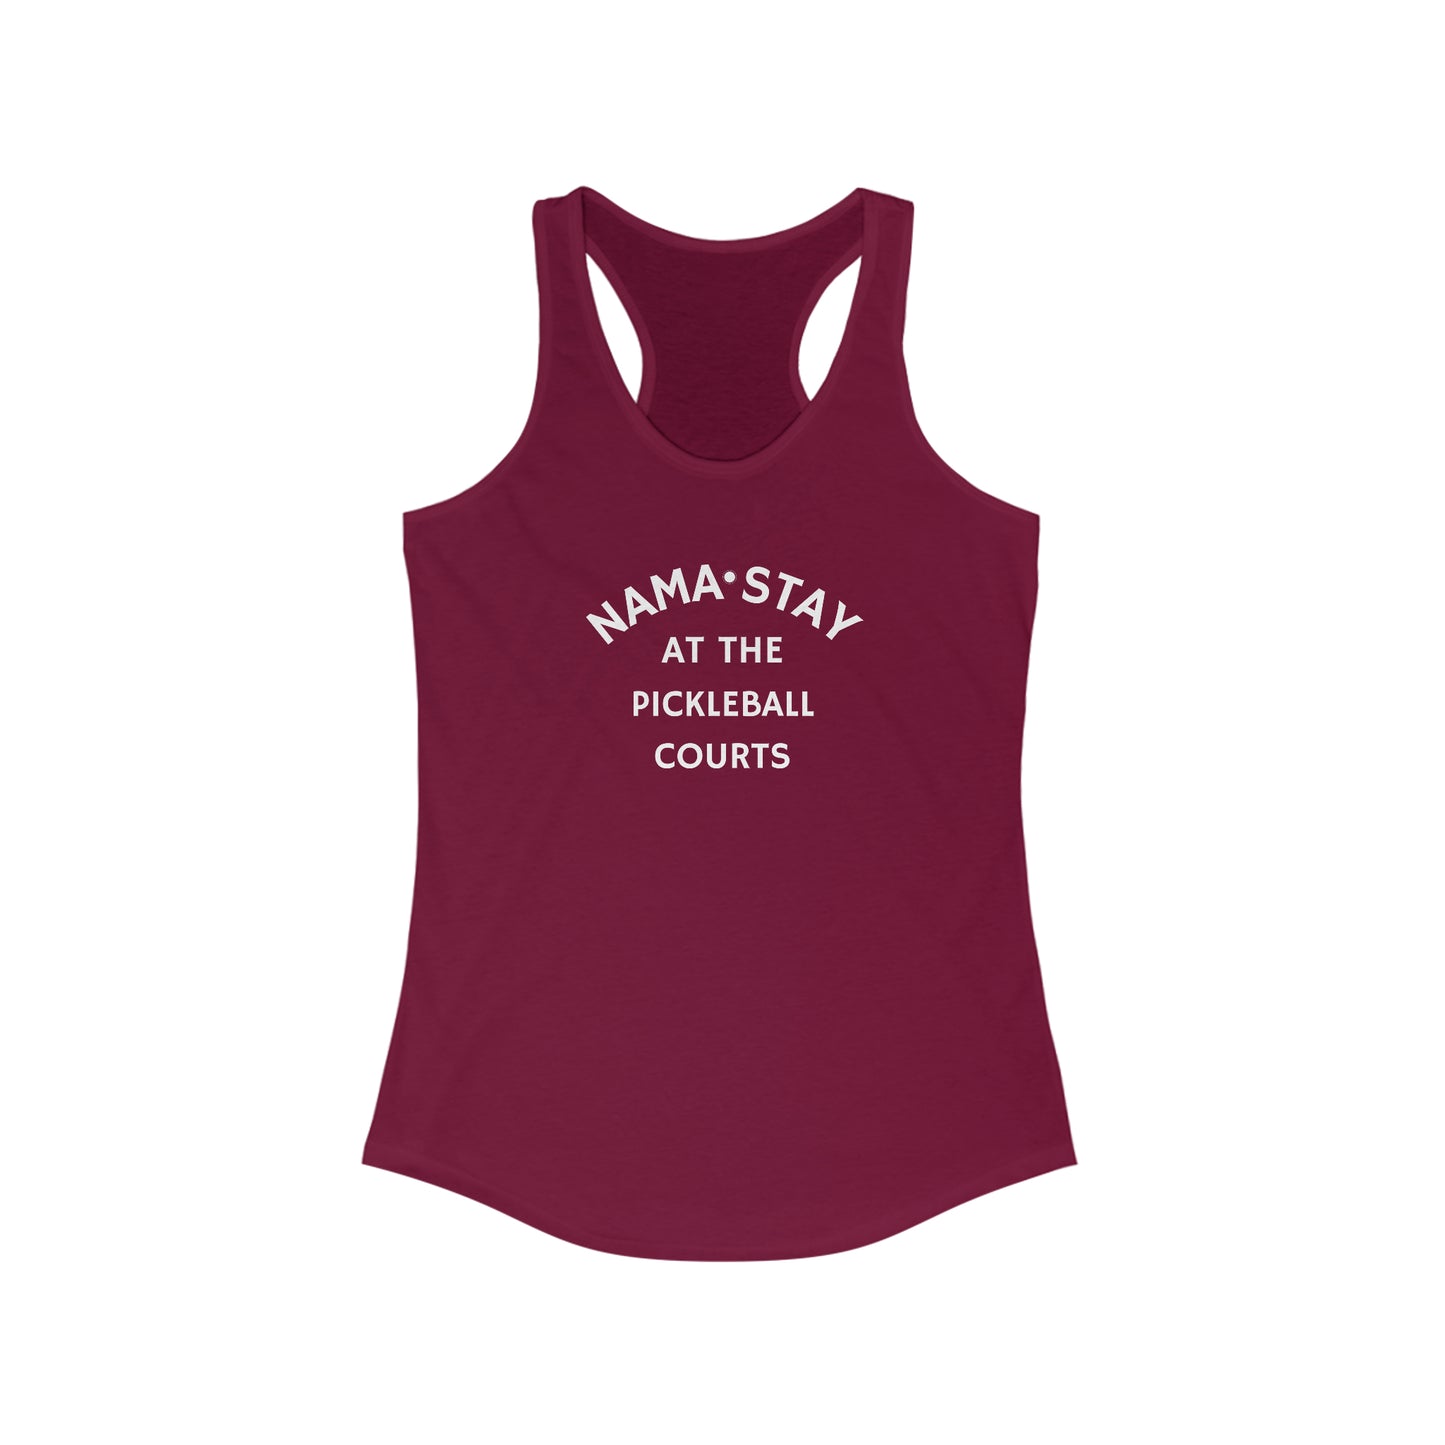 Nama Stay At The Pickleball Courts Supe Cute, Funny Tank Top